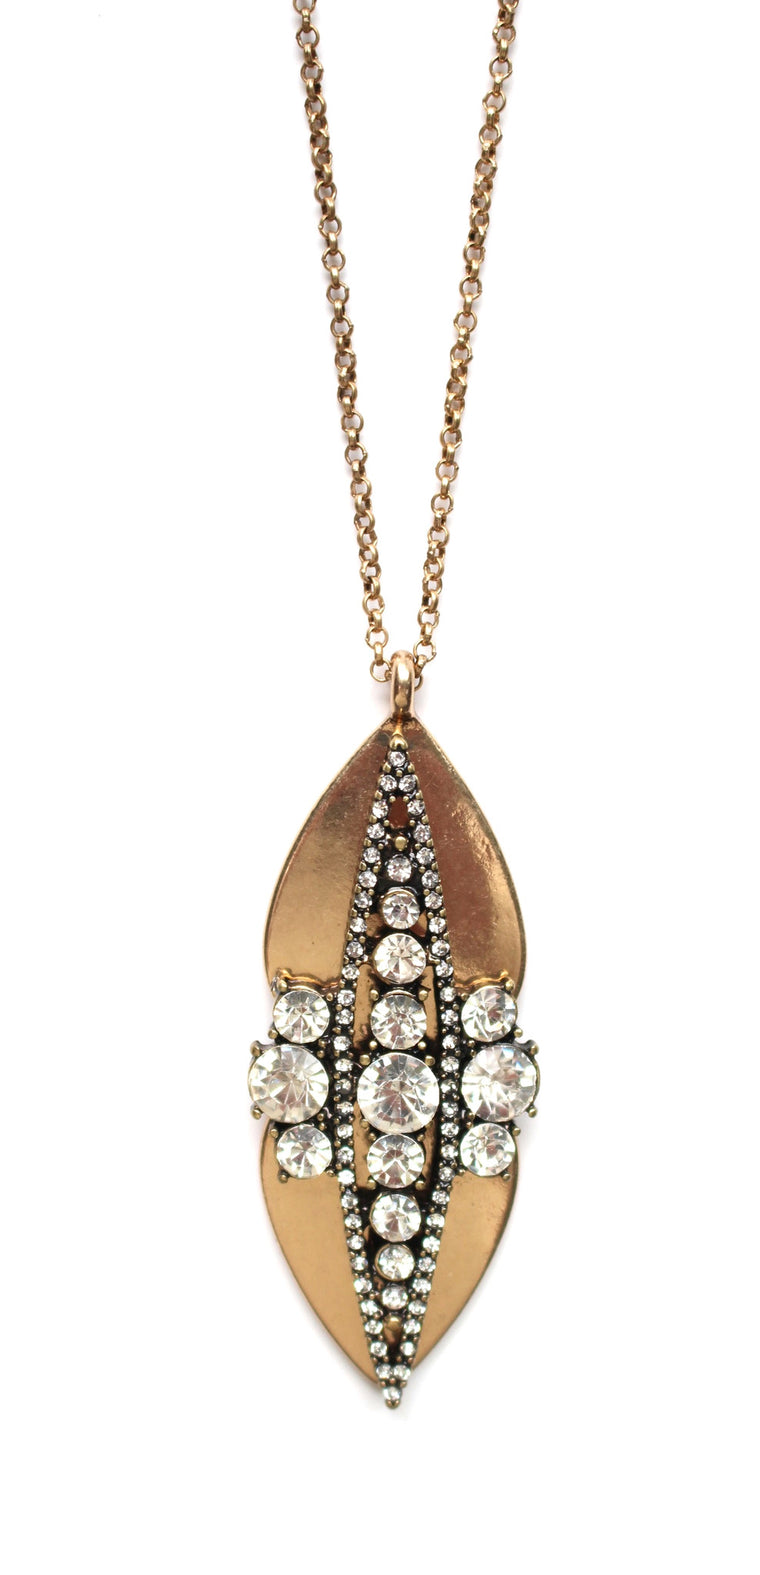 Crystal Studded Metal Long Necklace